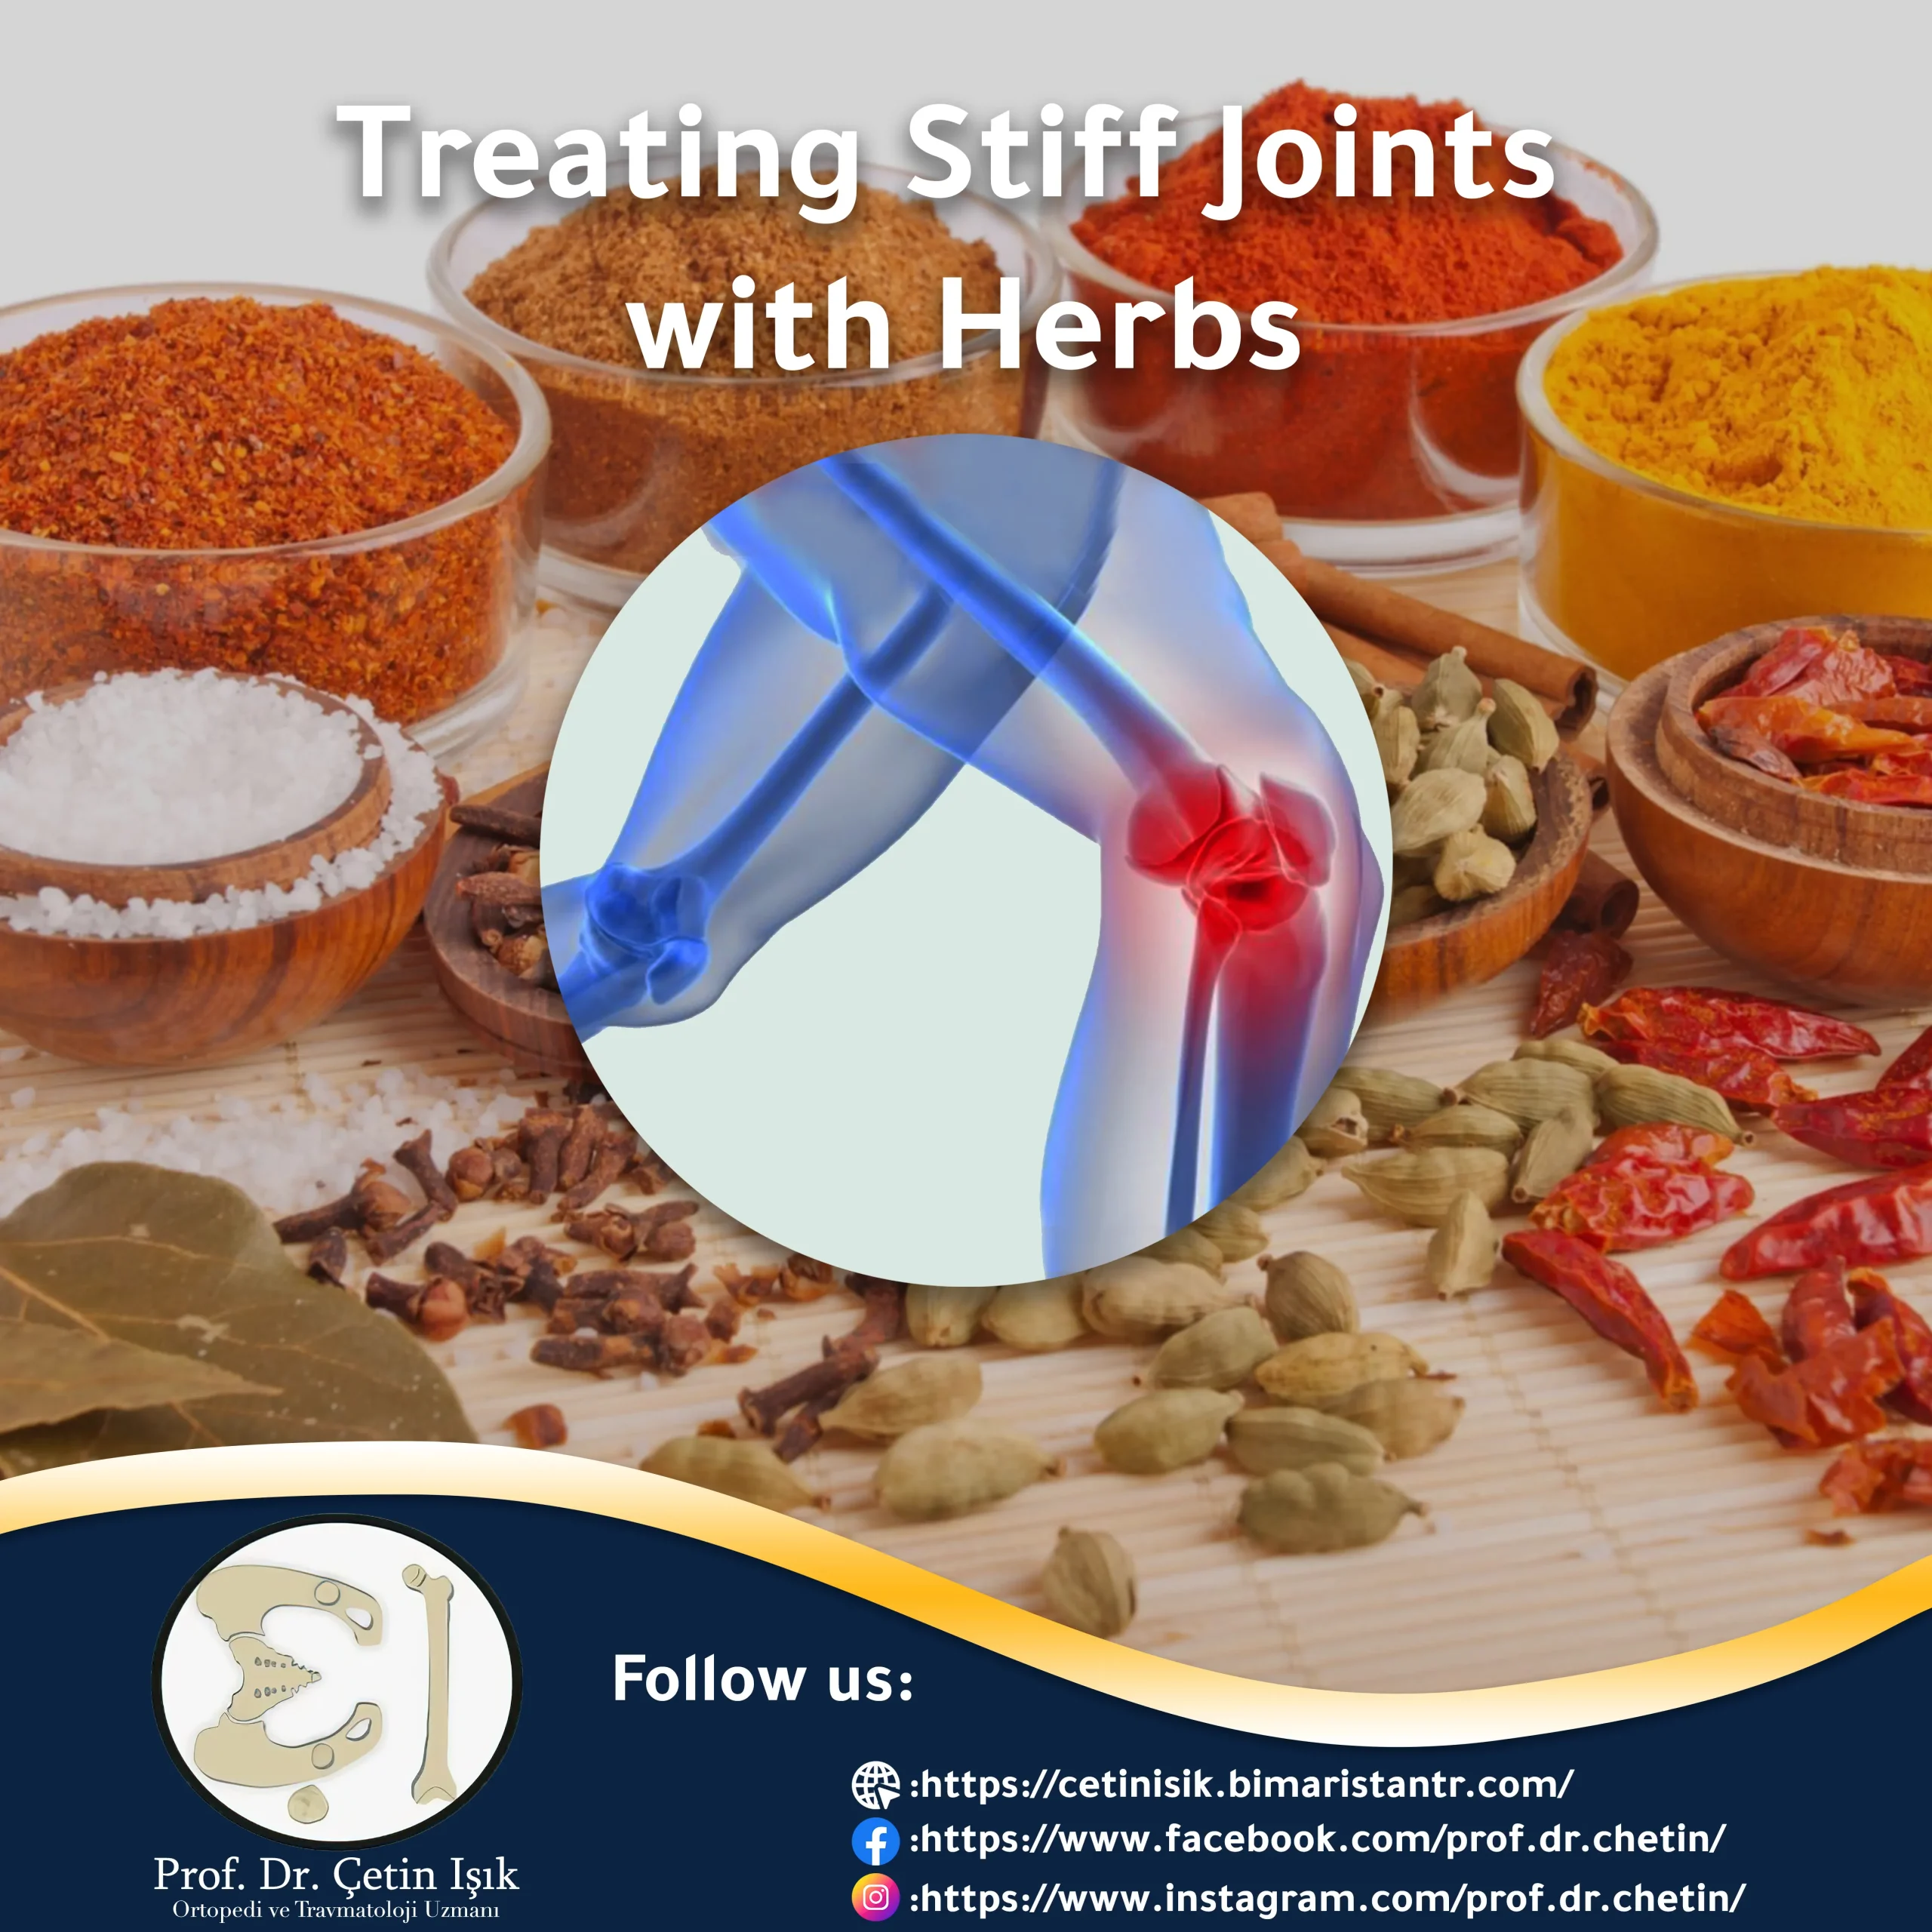 Image showing the treatment of stiff joints with herbs